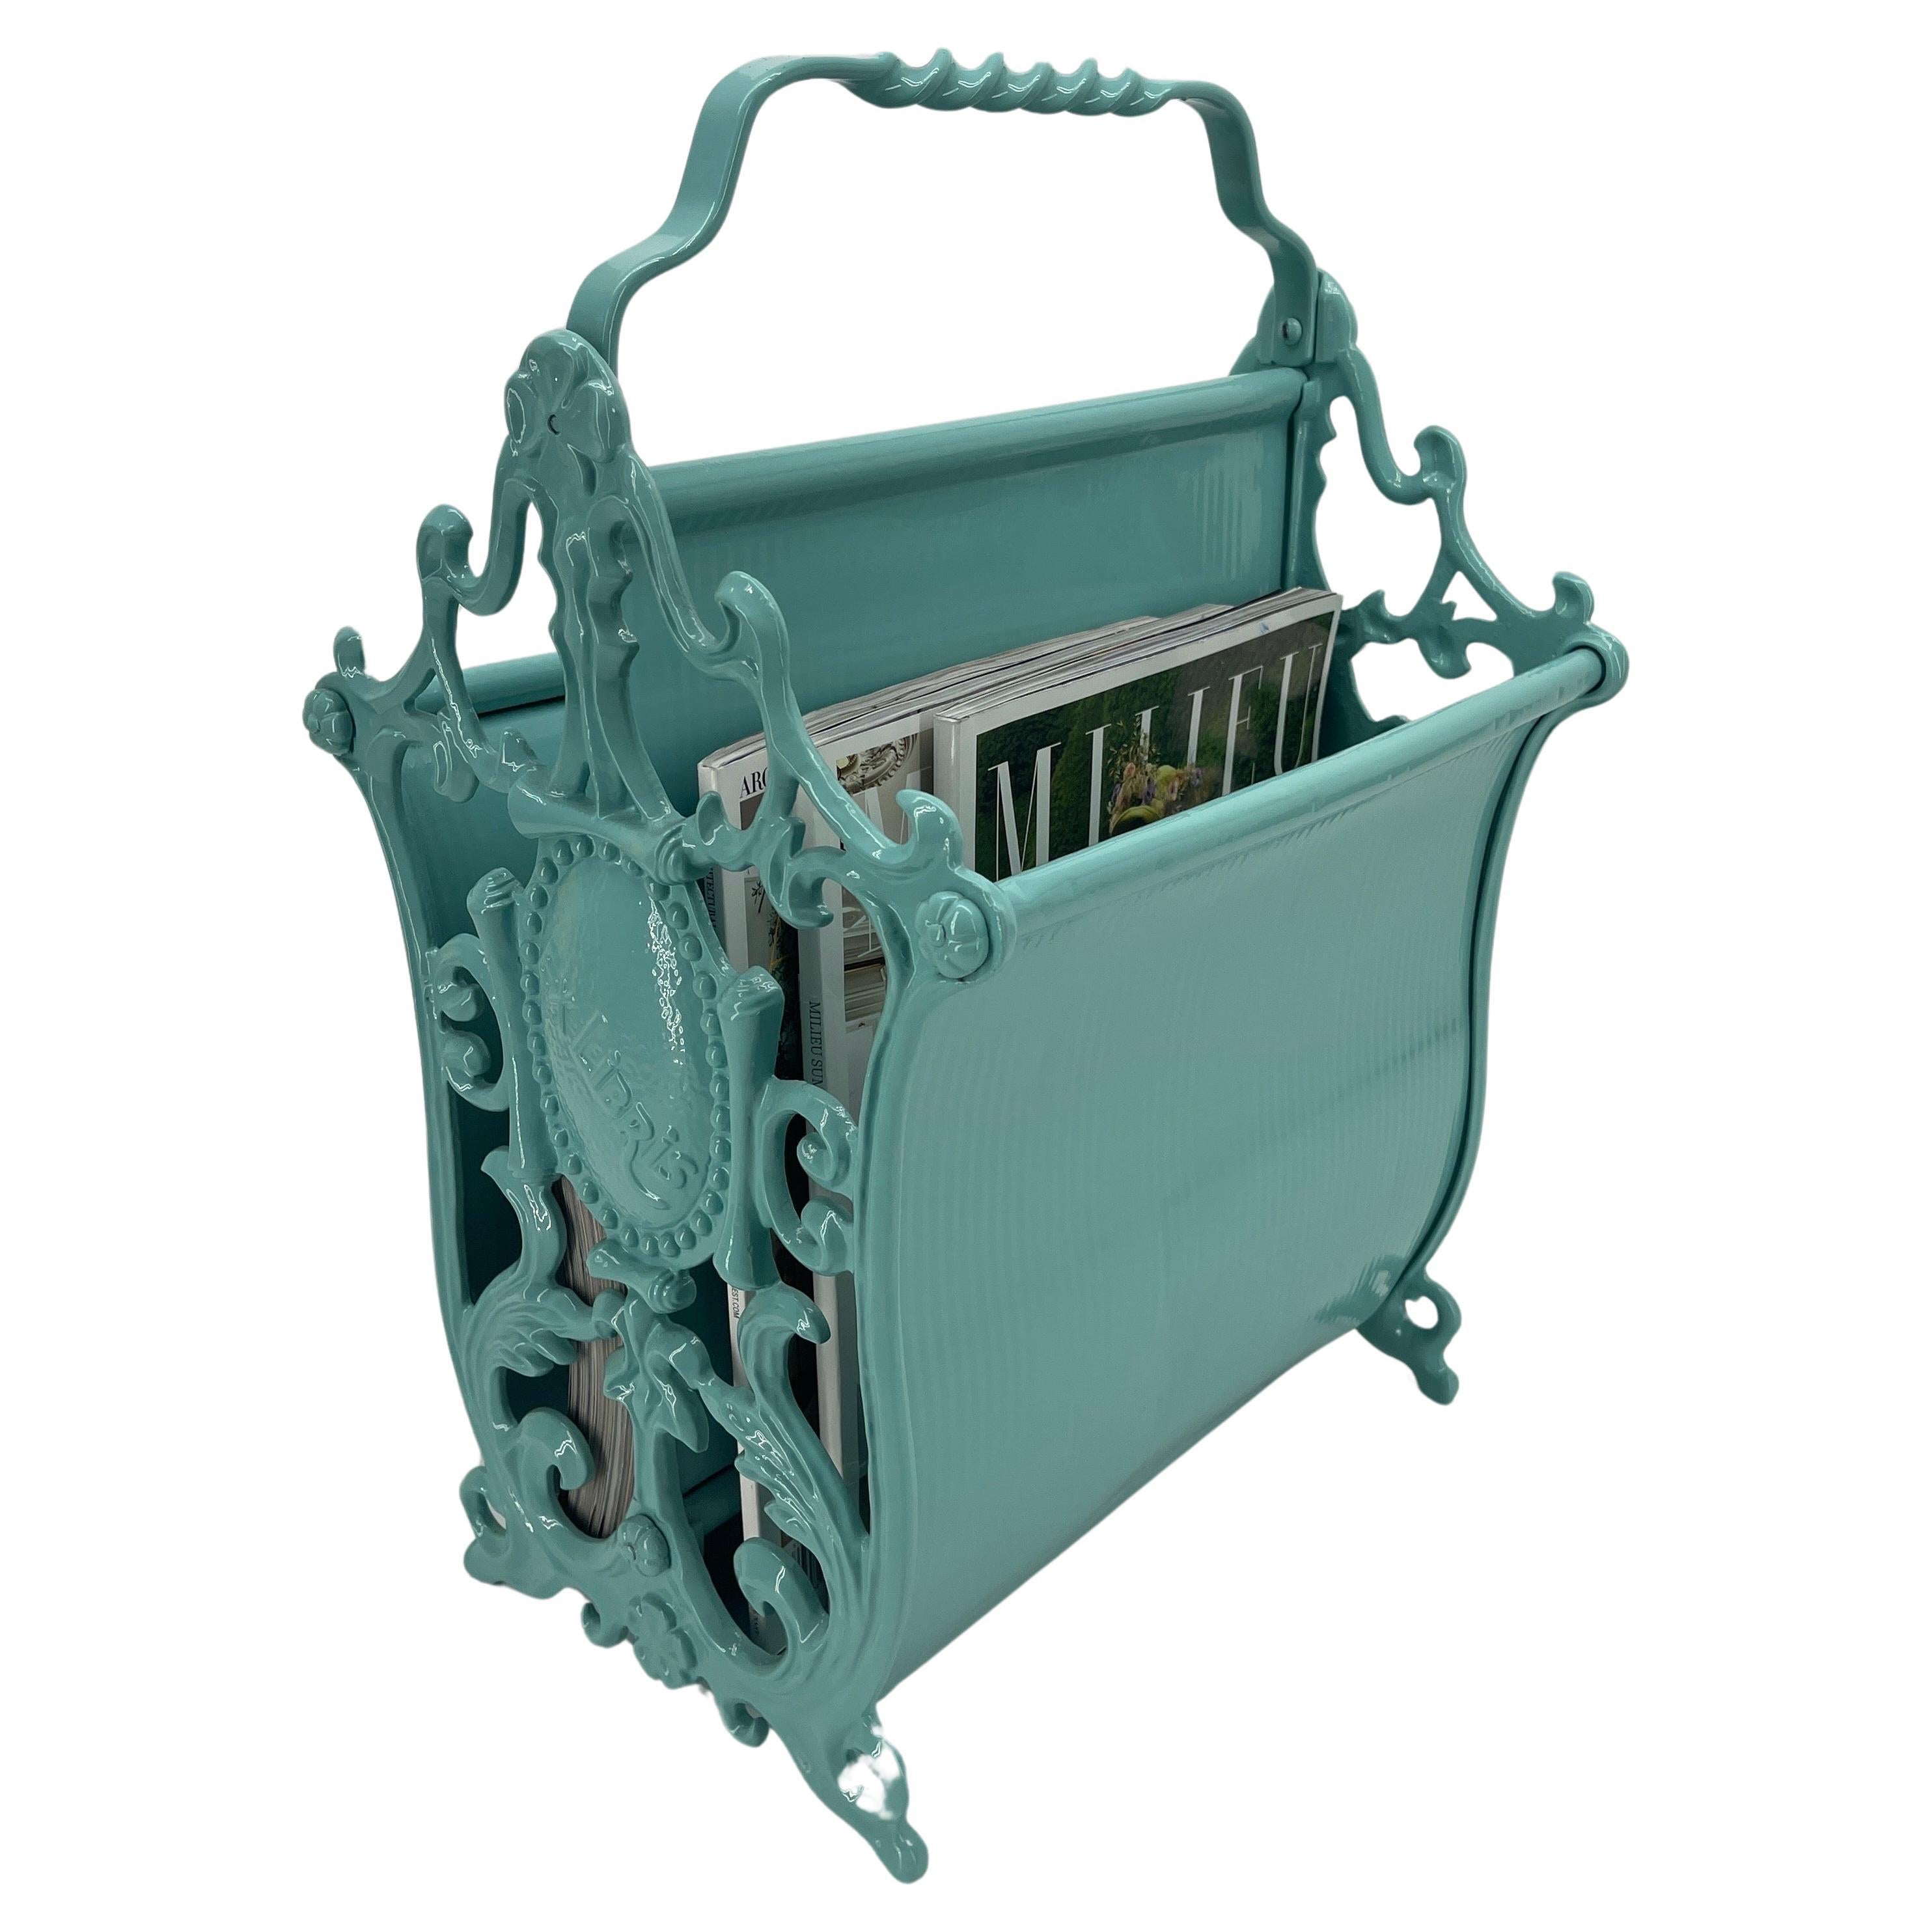 Turquoise Painted Wrought Iron Magazine Rack, "Ex Libris" For Sale